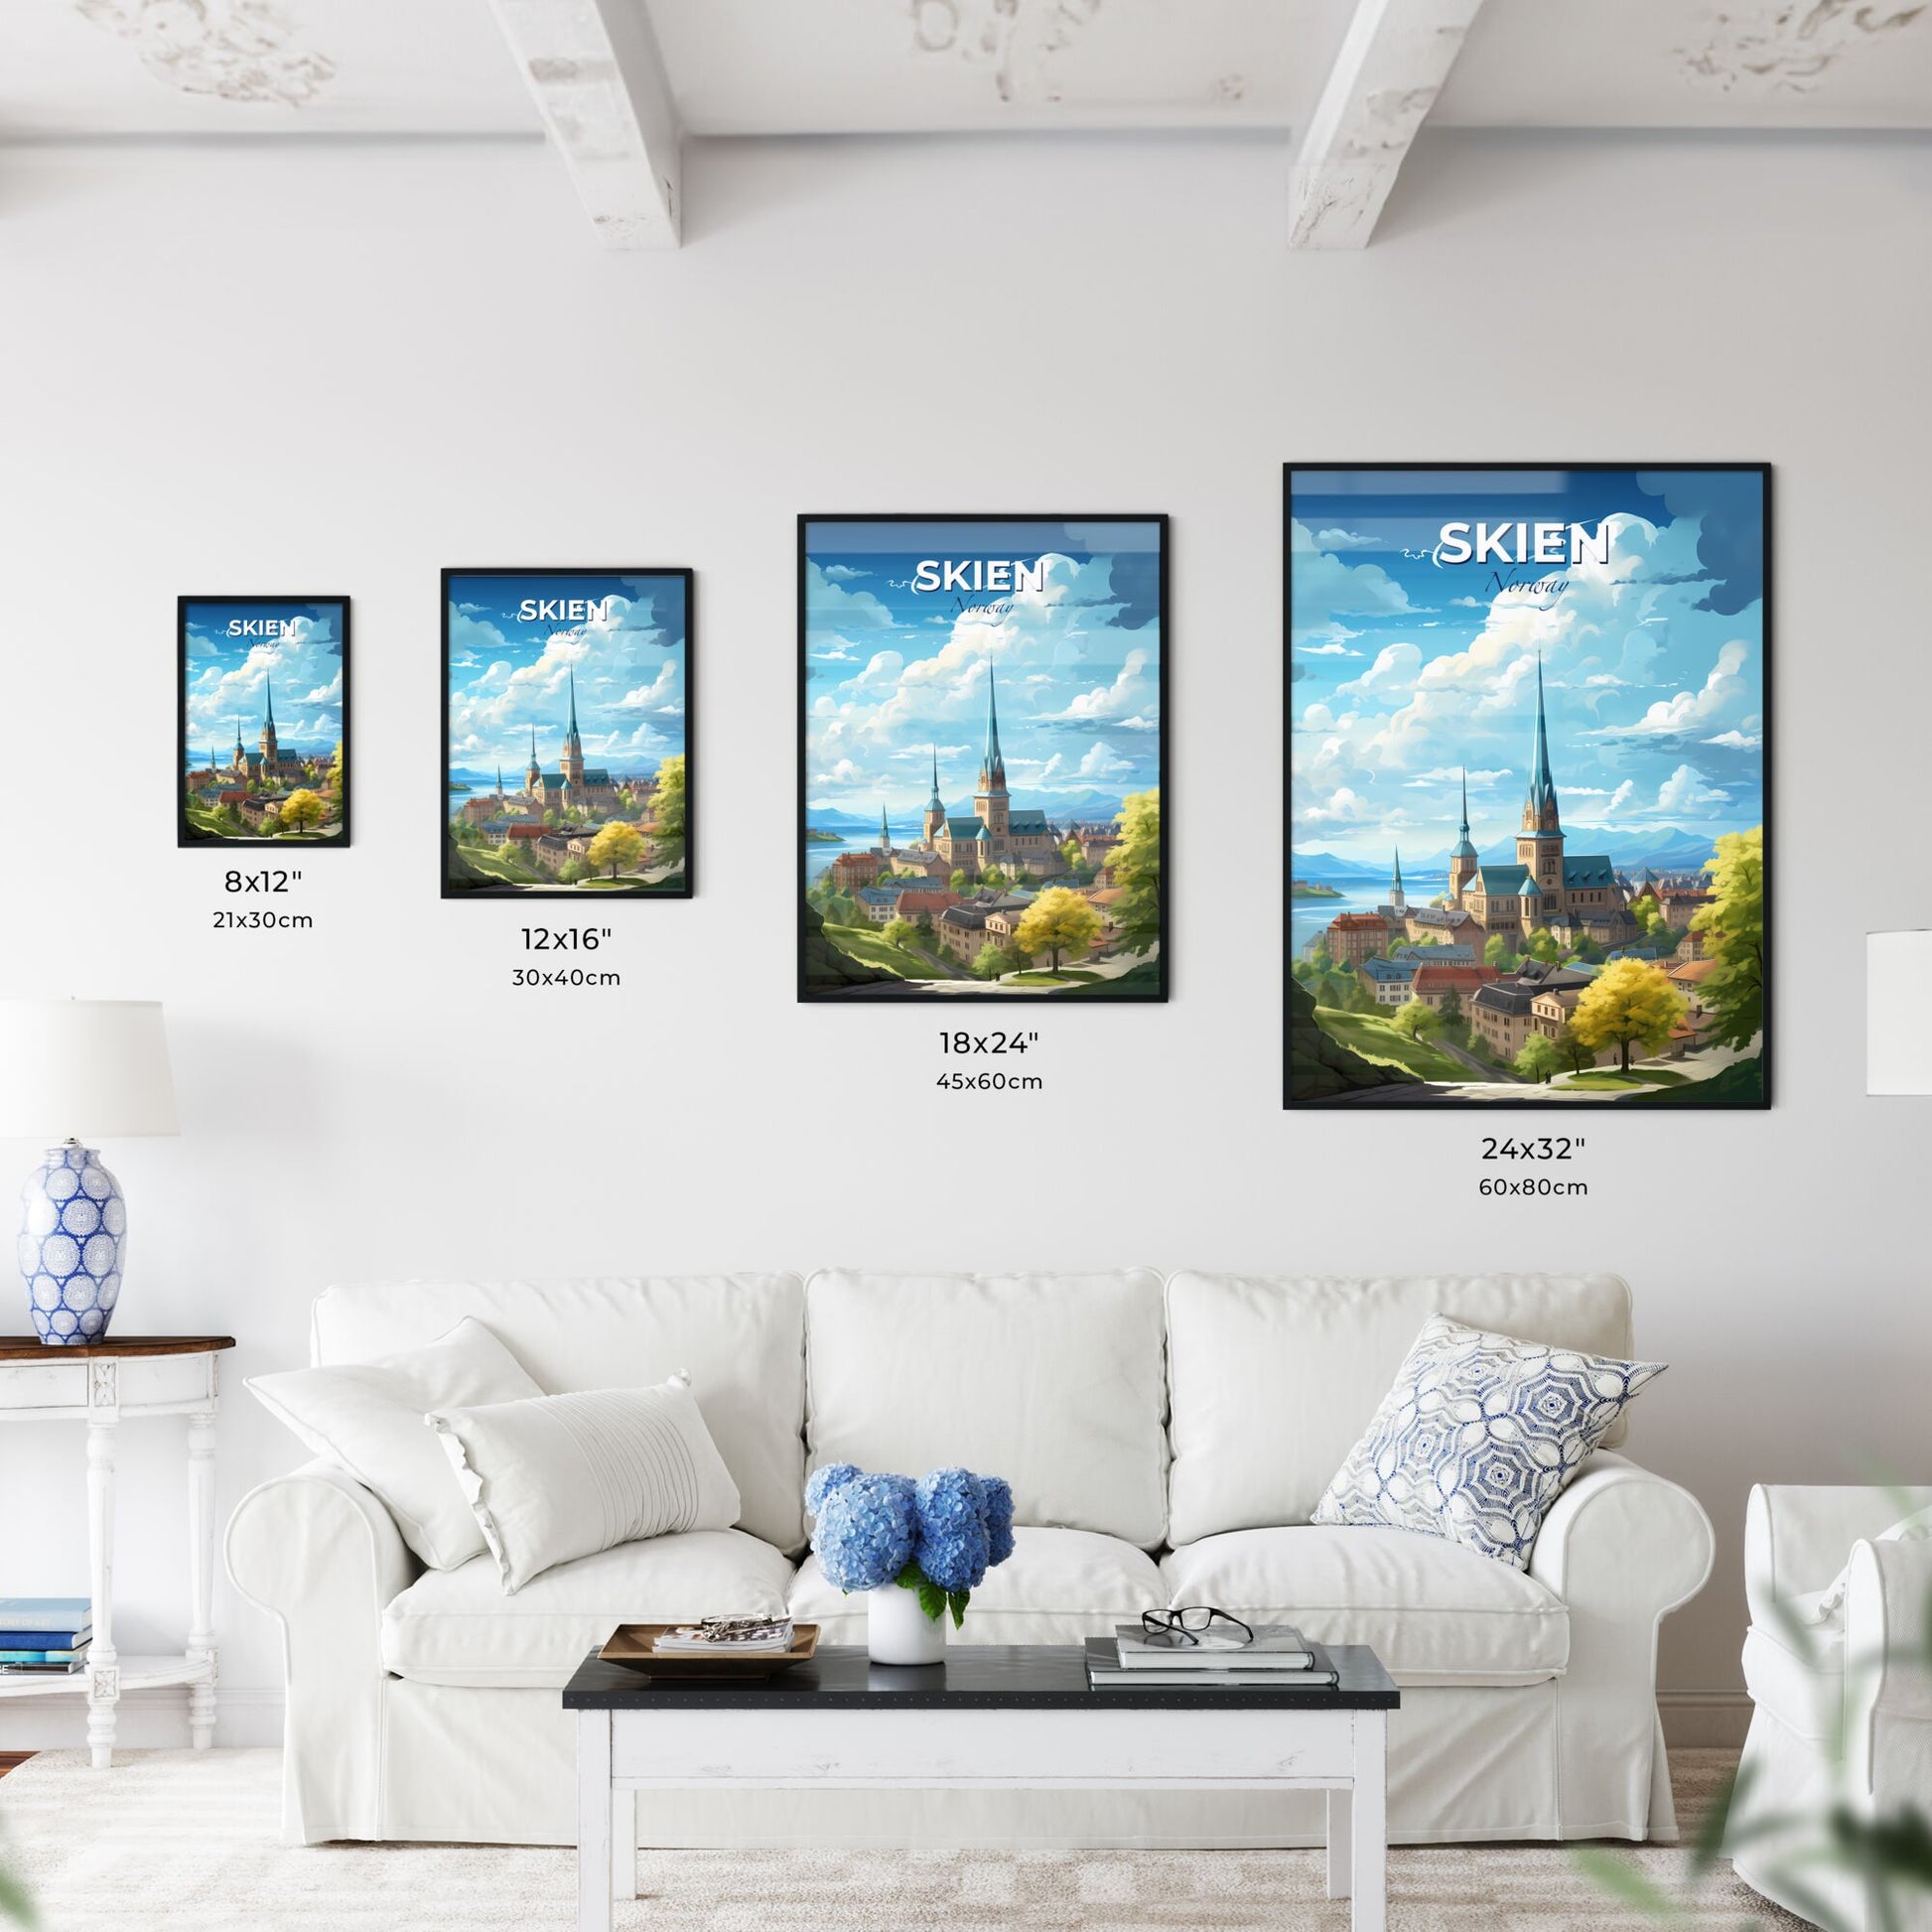 Skien Norway Skyline - A City With A Steeple And Trees - Customizable Travel Gift Default Title